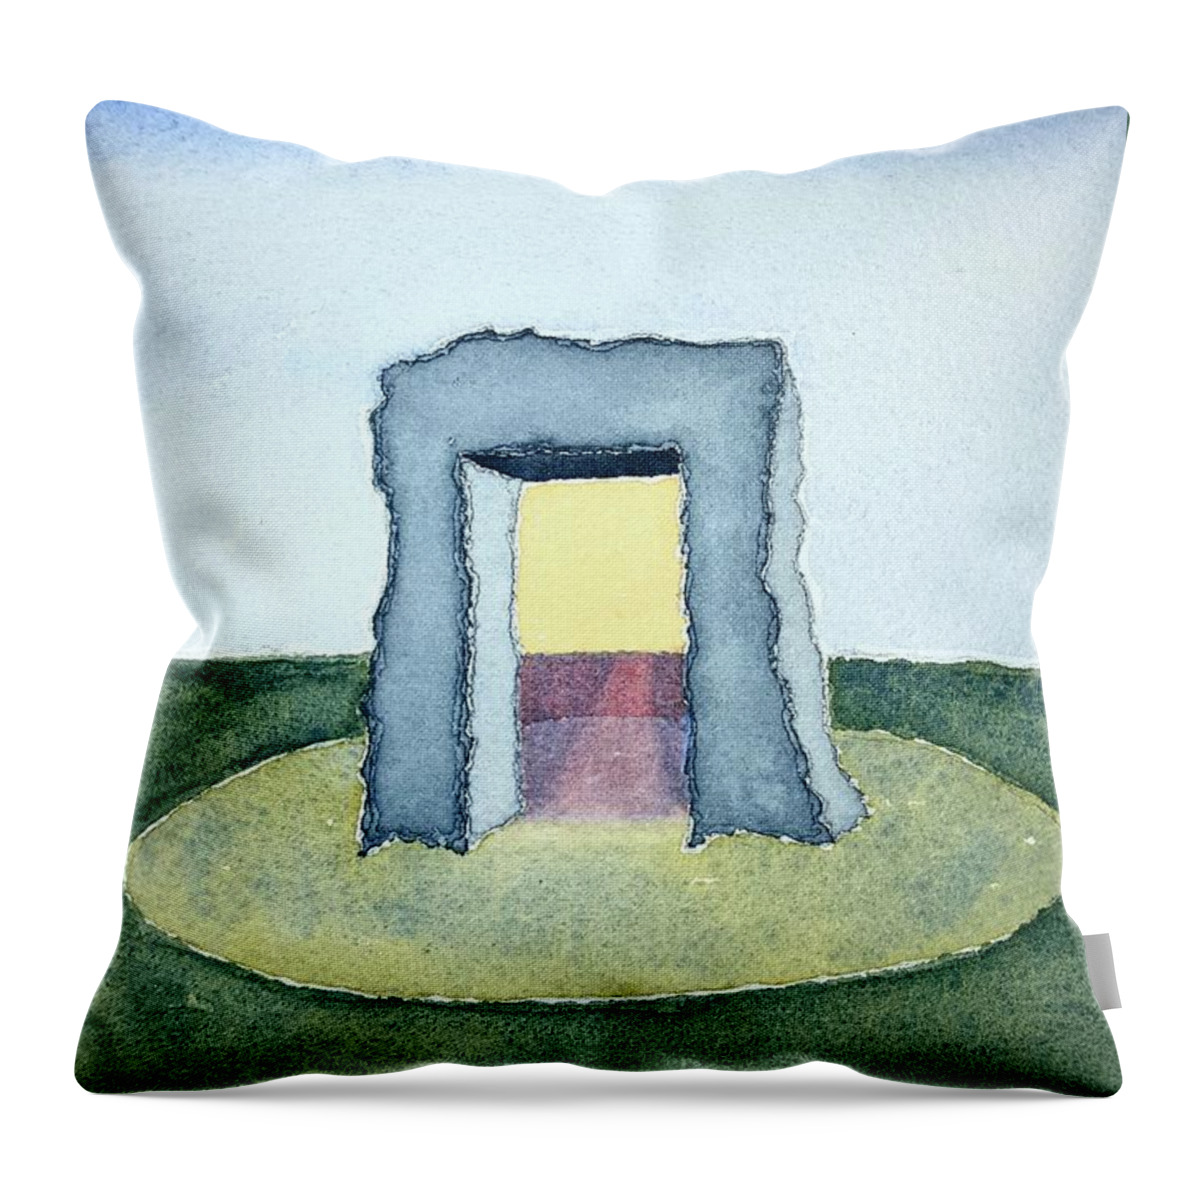 Watercolor Throw Pillow featuring the painting The Portal by John Klobucher